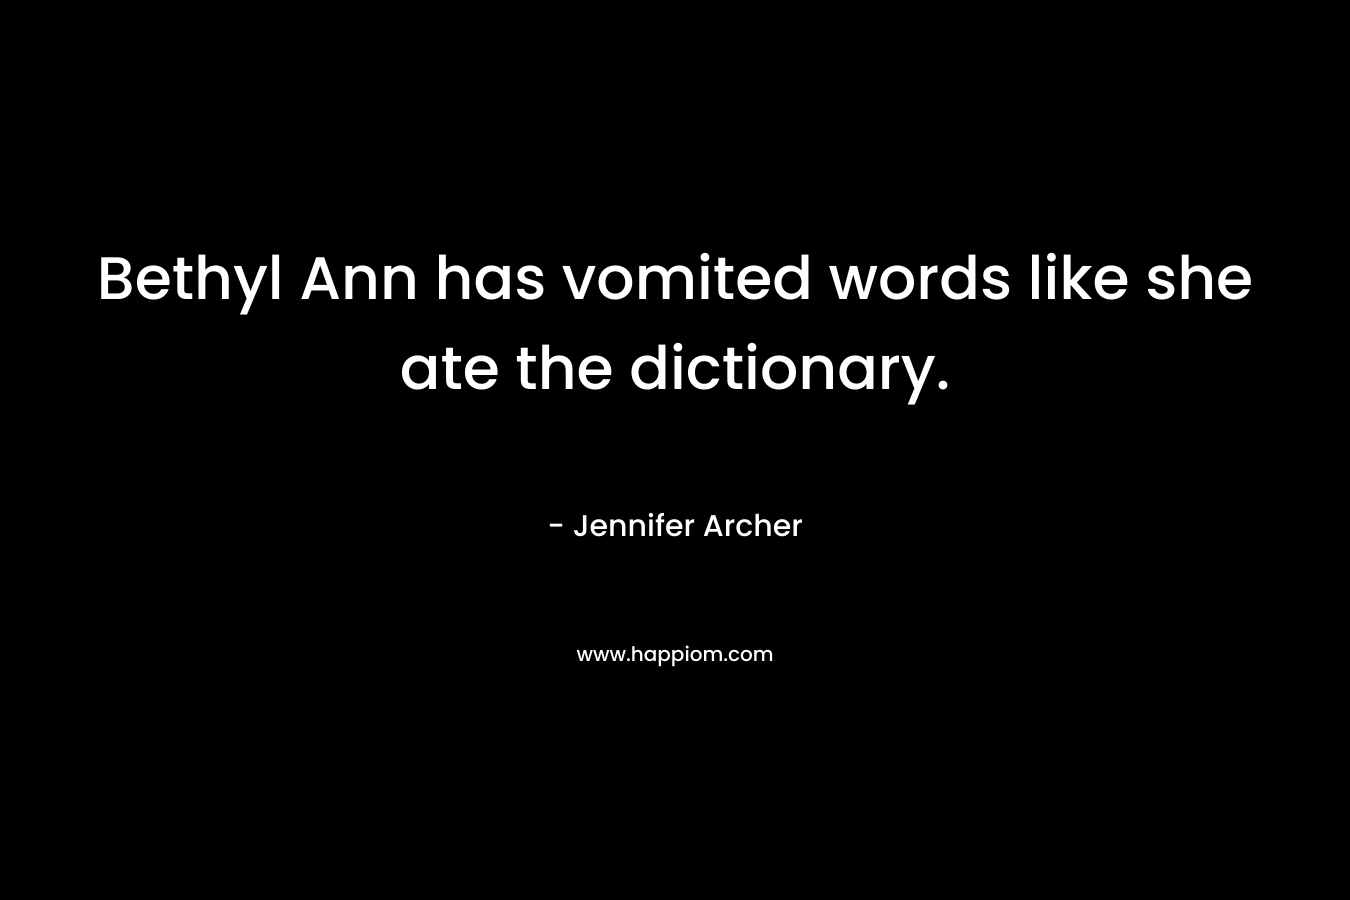 Bethyl Ann has vomited words like she ate the dictionary. – Jennifer Archer